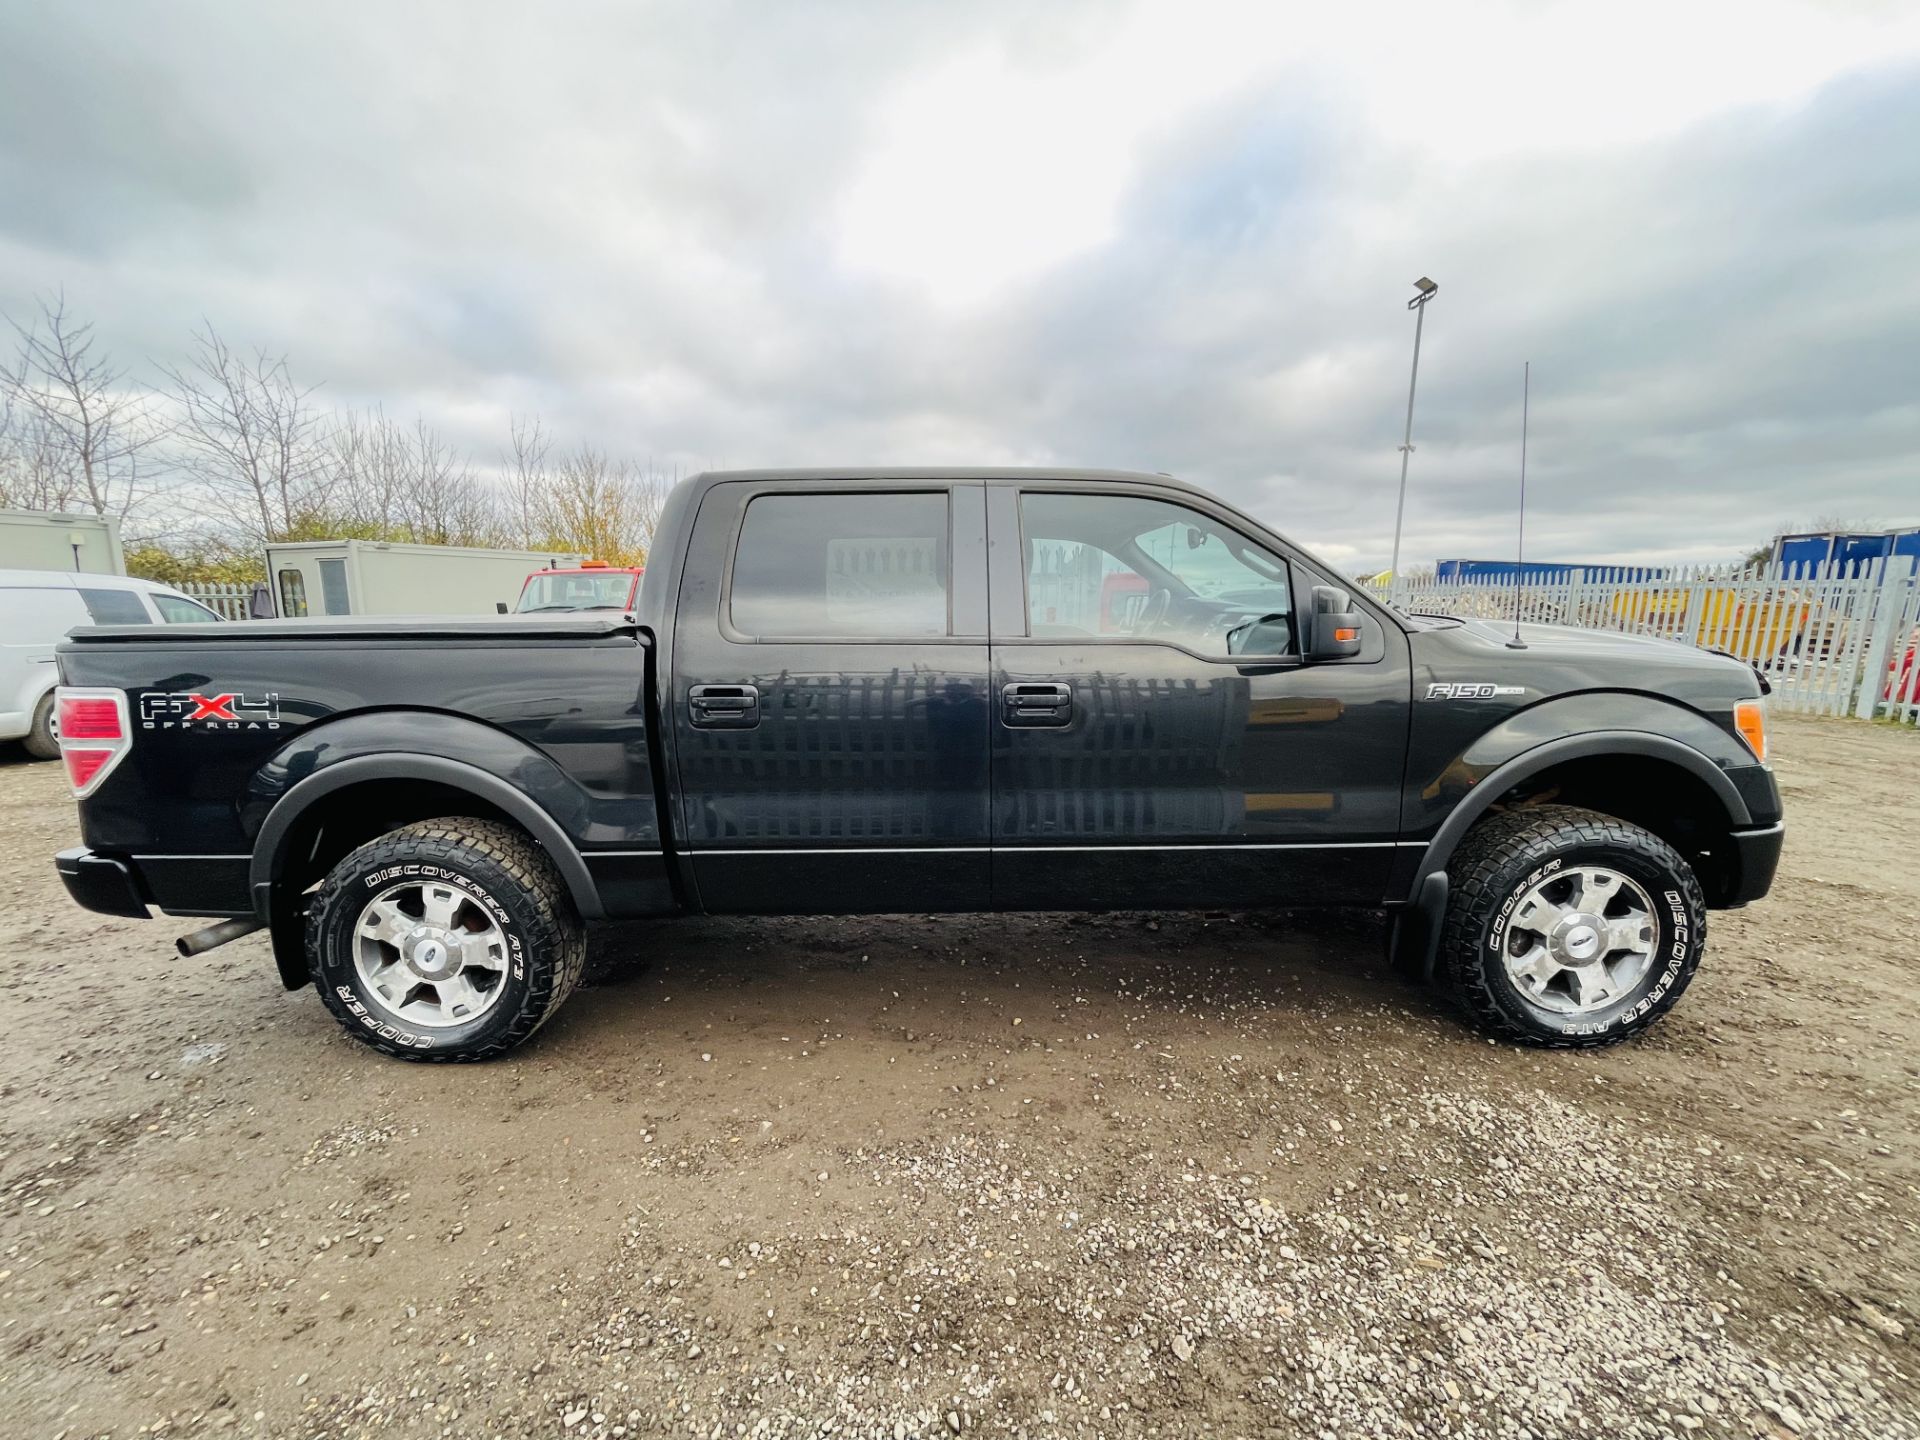 Ford F-150 3.5L V6 SuperCab 4WD FX4 Edition '2010 Year' Colour Coded Package - Top Spec - Image 8 of 24